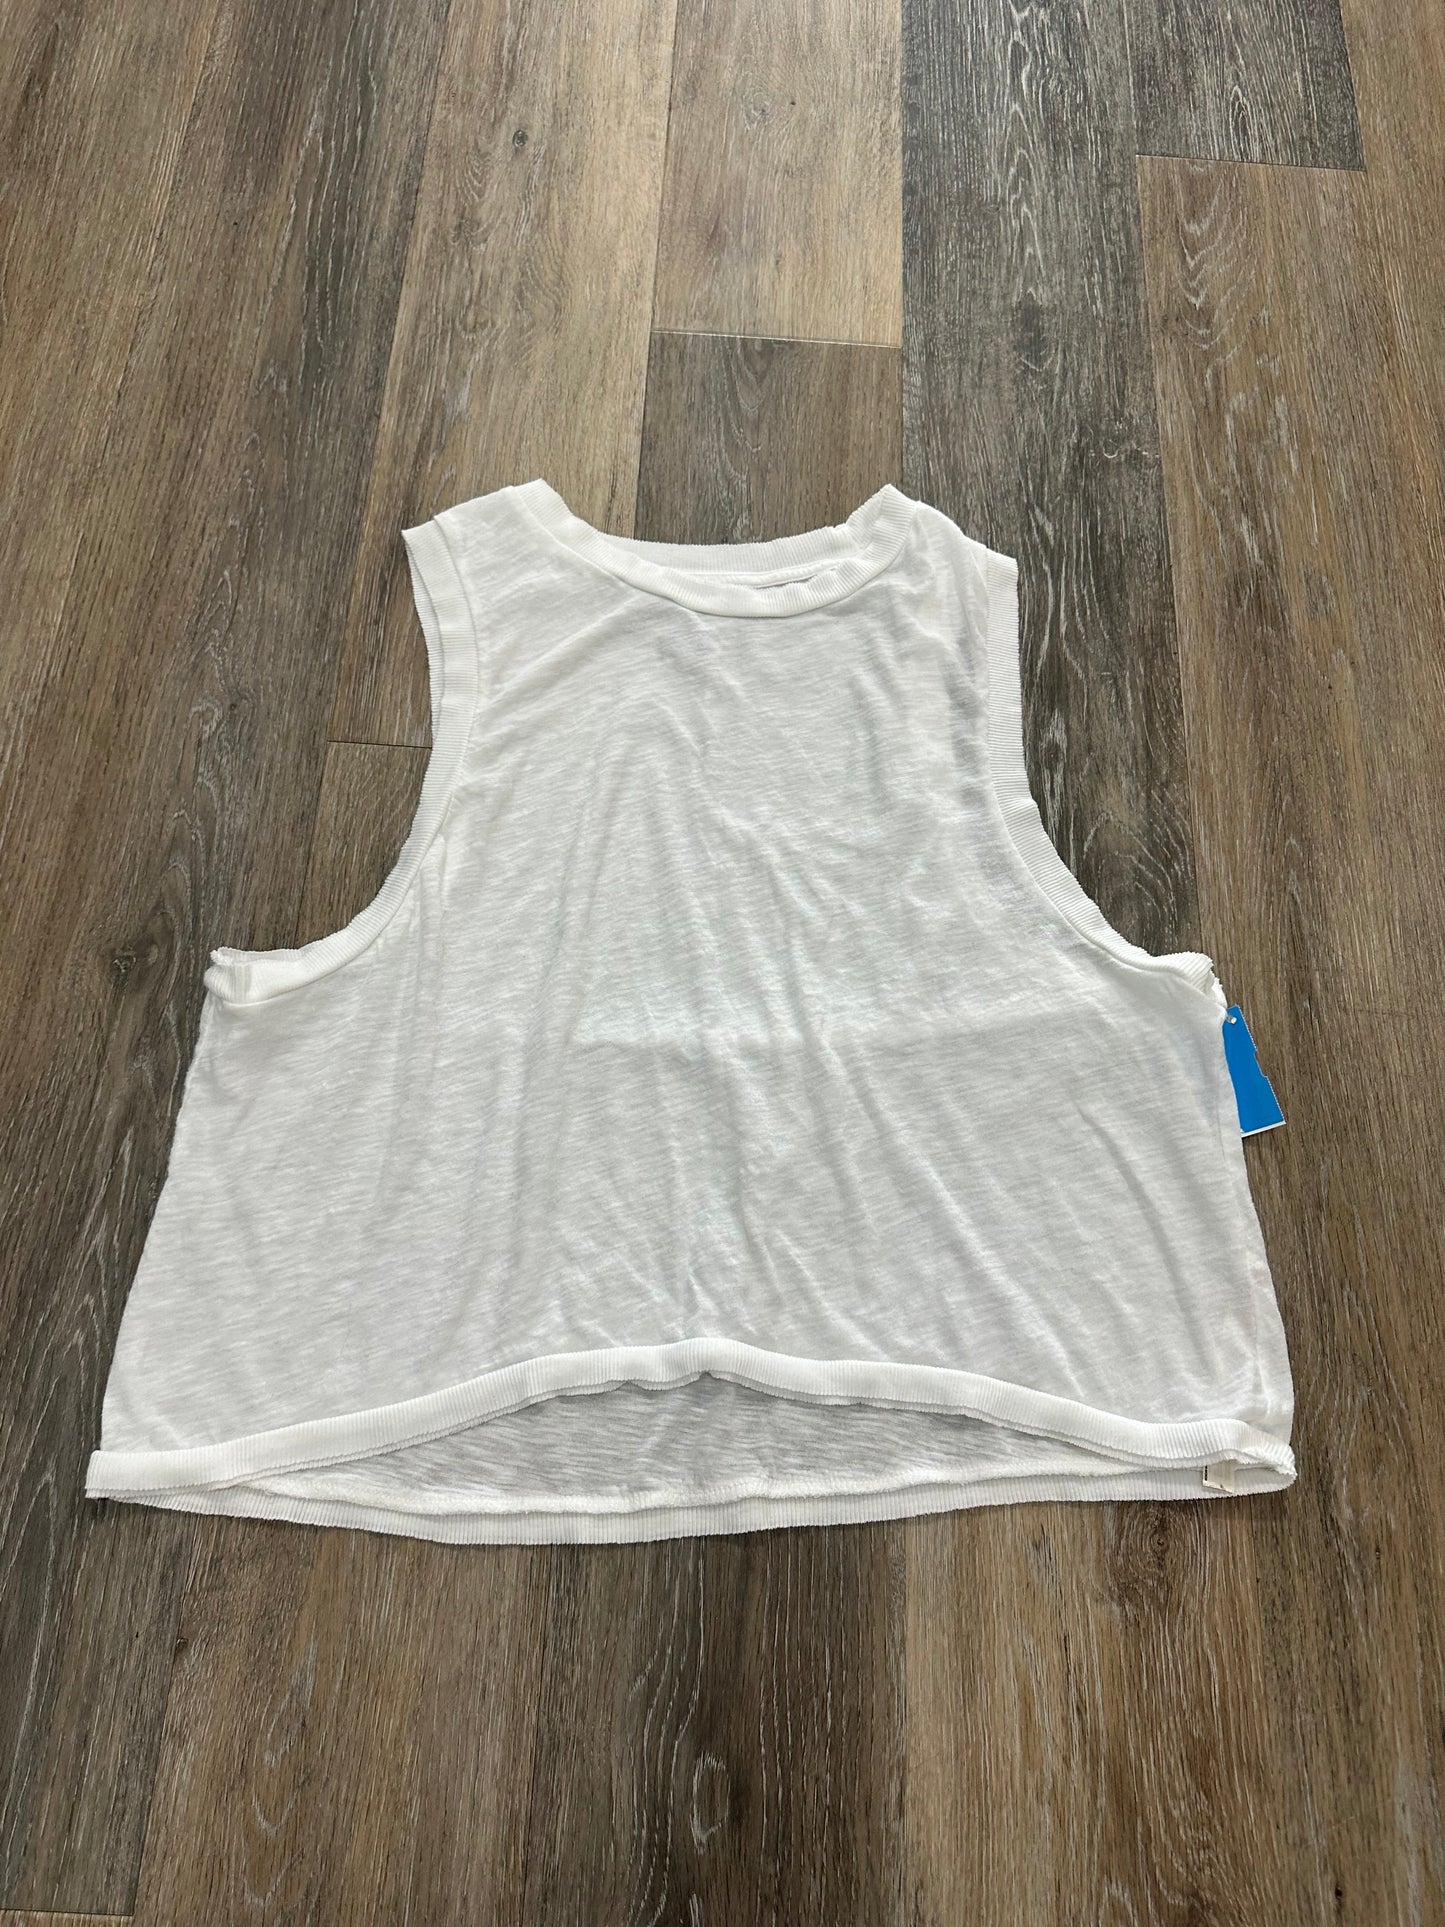 White Athletic Tank Top Free People, Size L